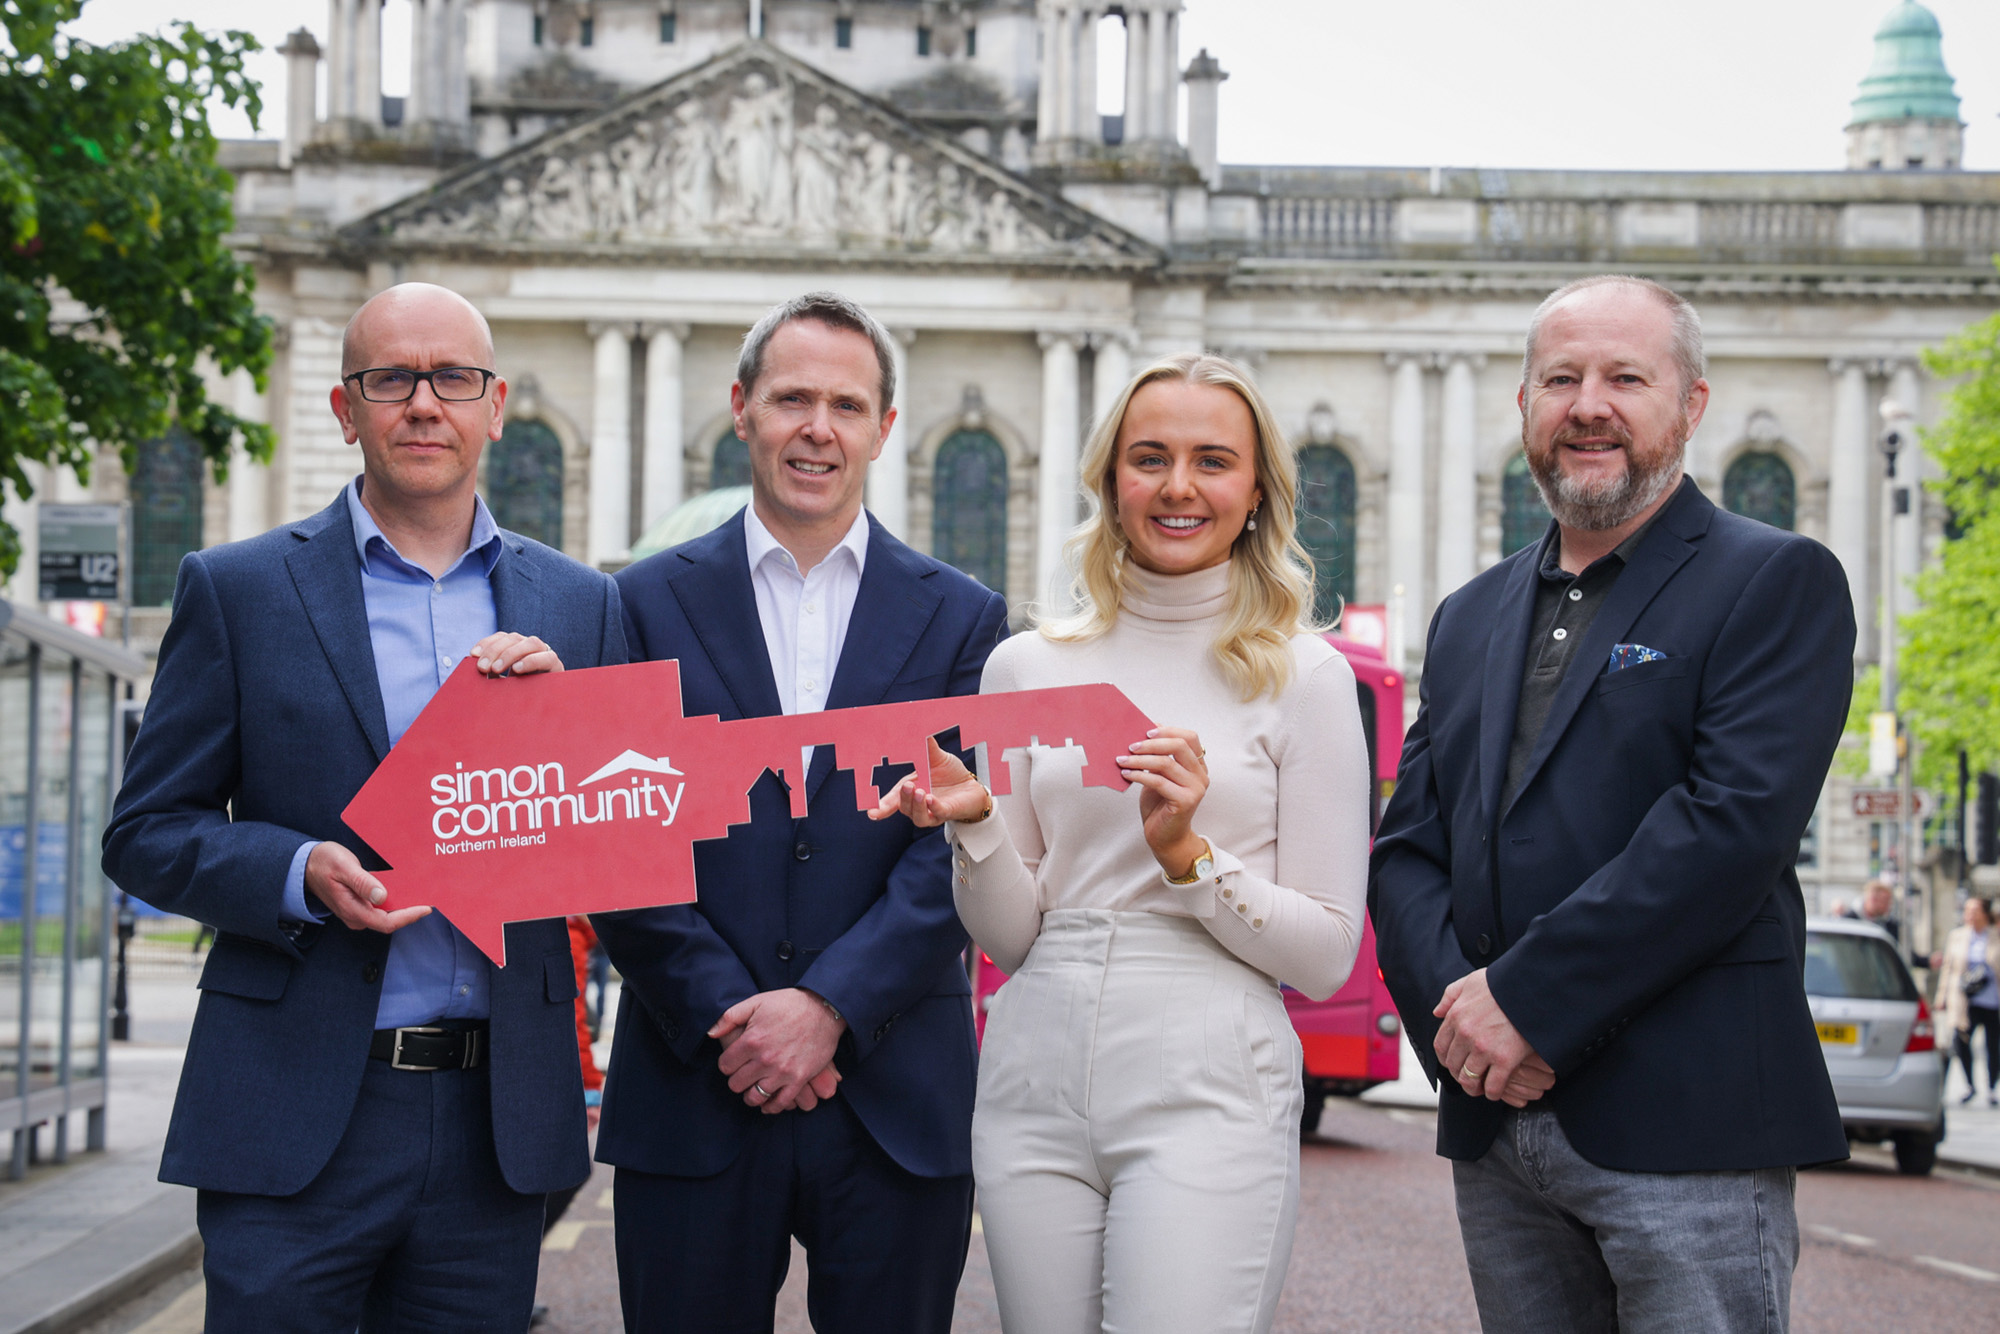 A&L Goodbody partners with Simon Community NI